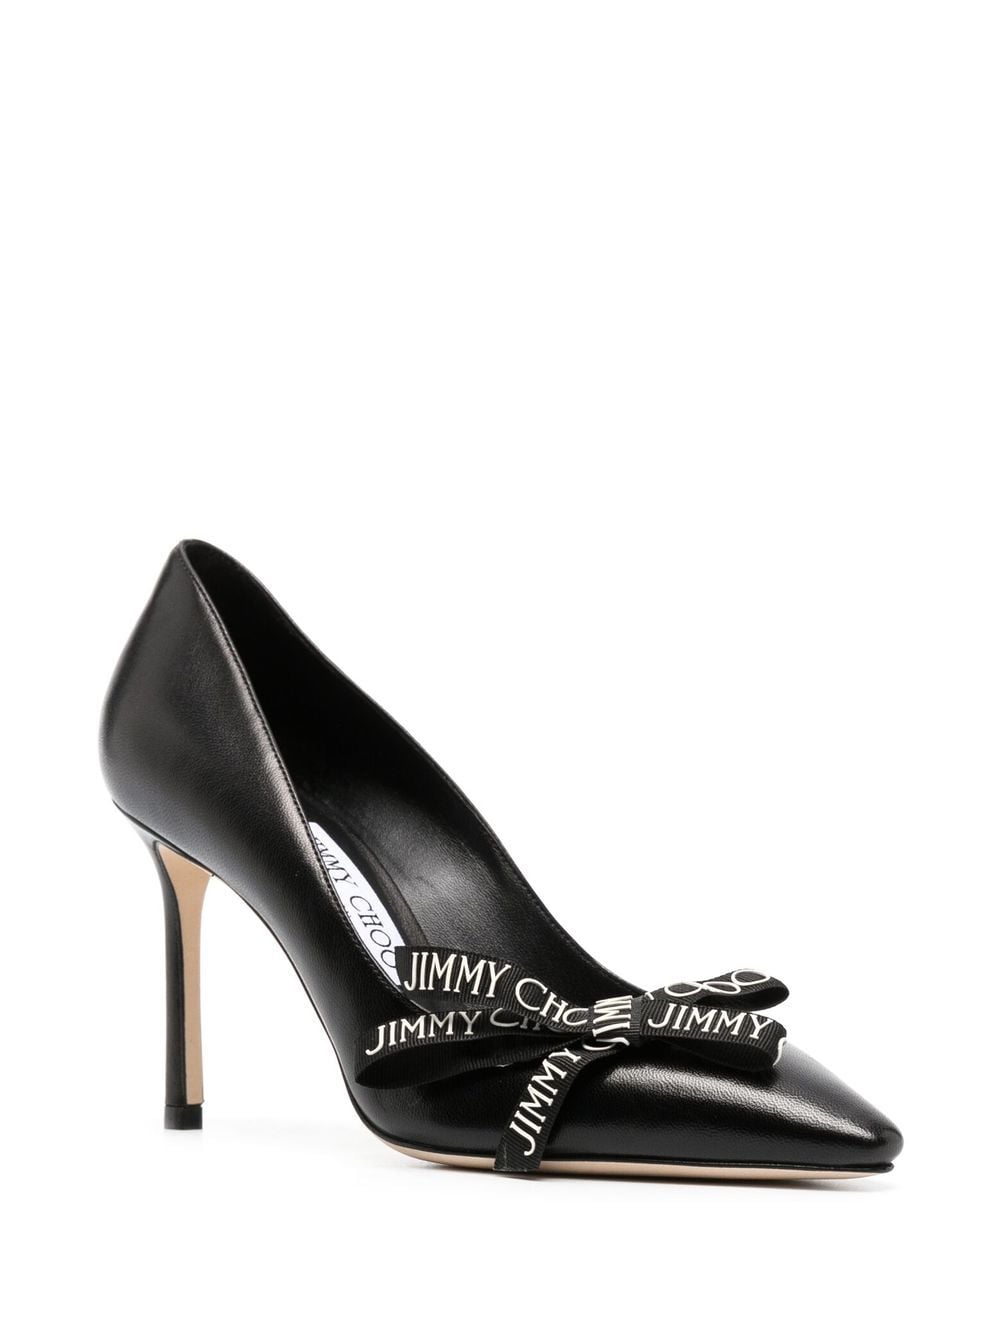 JIMMY CHOO Black Leather 85mm Pumps for Women with Bow Detailing and Pointed Toe